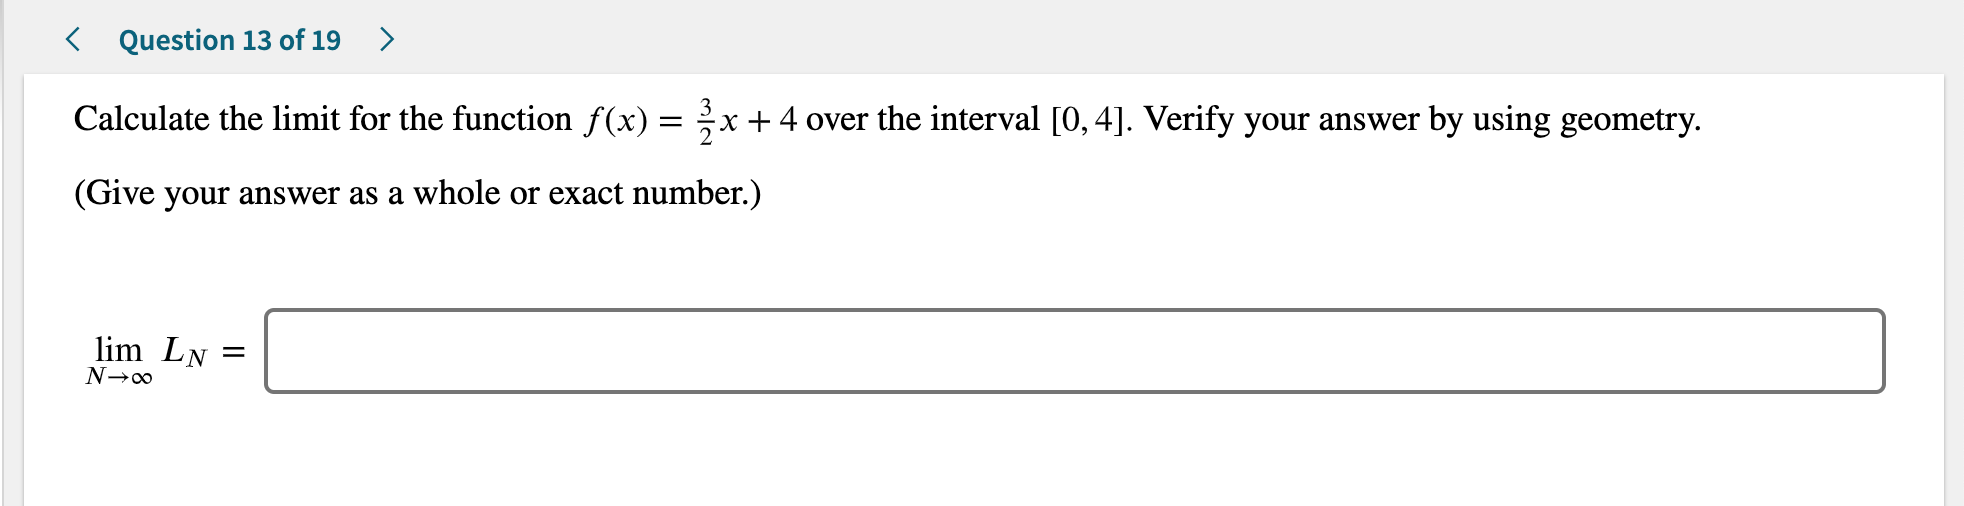 < Question 13 of 19>
Calculate the limit for the function f(x) =
x + 4 over the interval [0, 4]. Verify your answer by using geometry
11
(Give your answer as a whole or exact number.)
lim LN
N--o0
